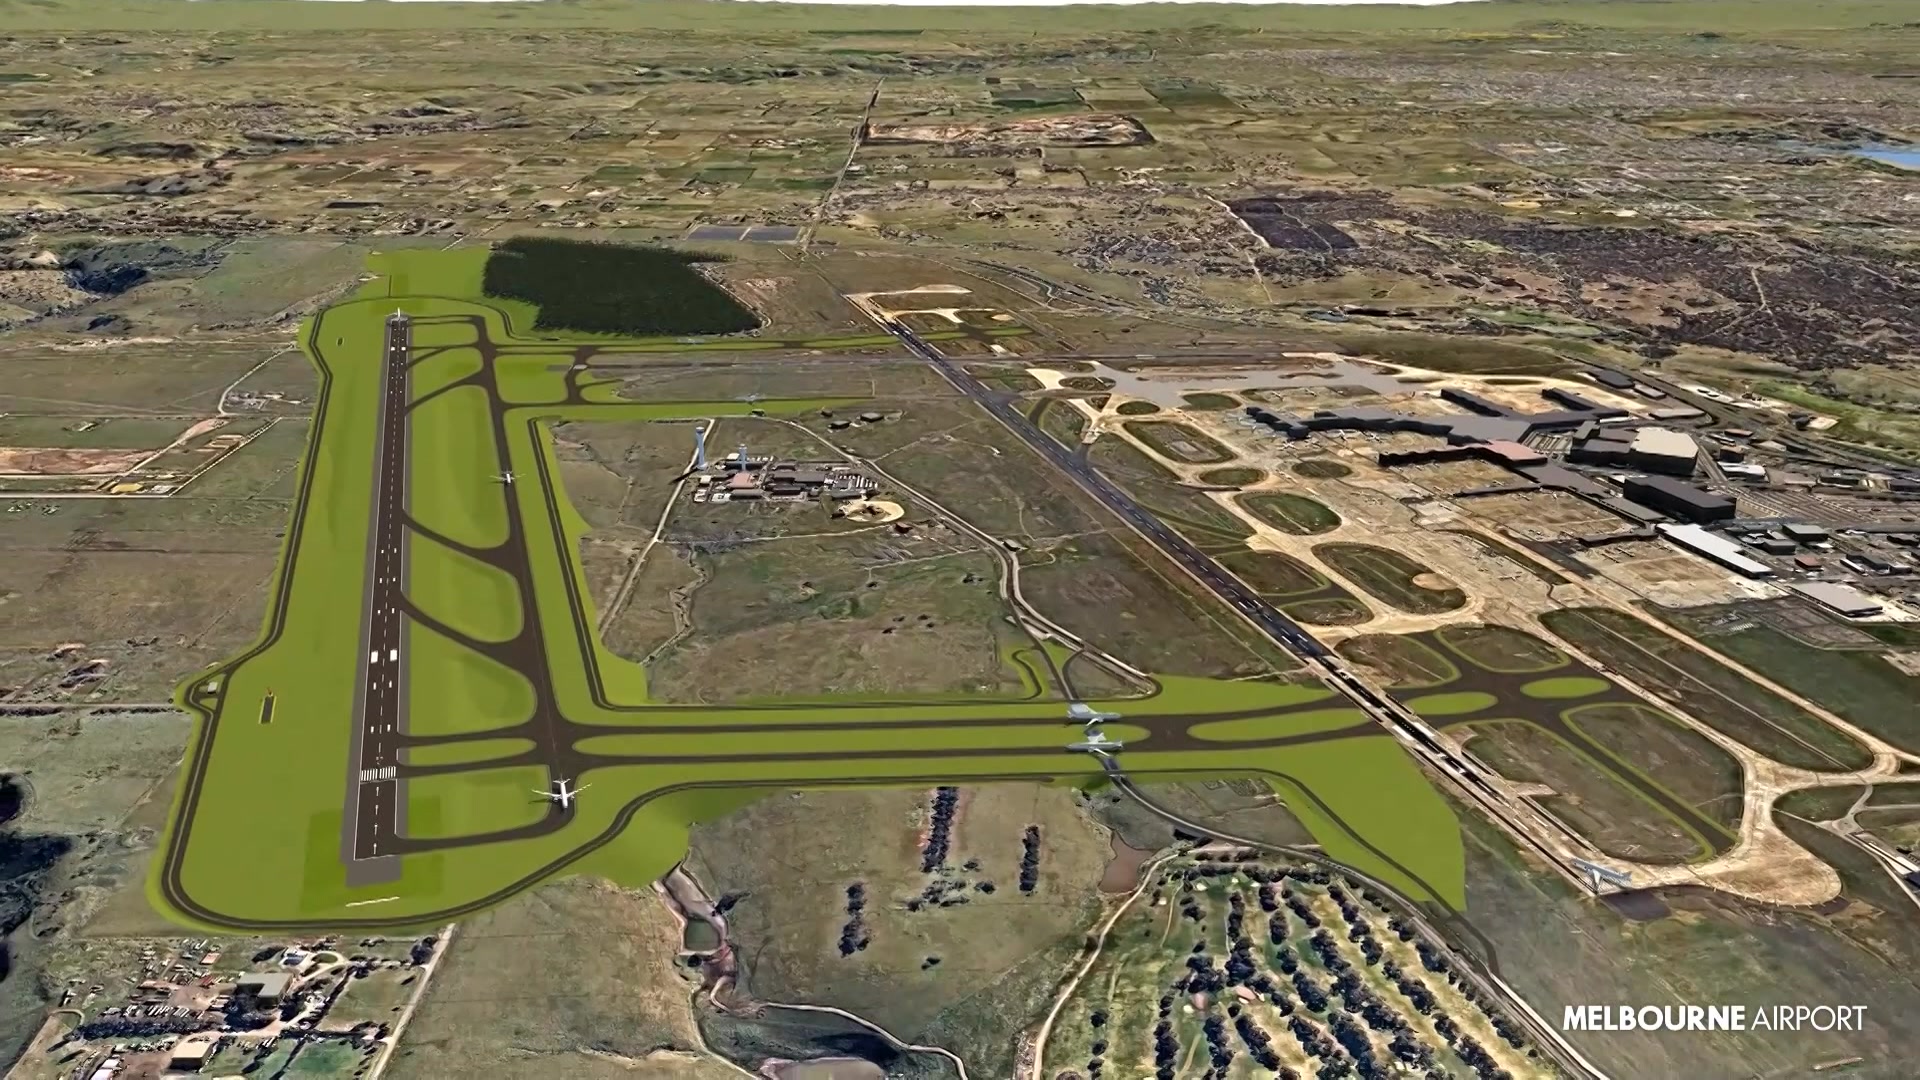 A birdseye view of plans for a third runway for Melbourne Airport.